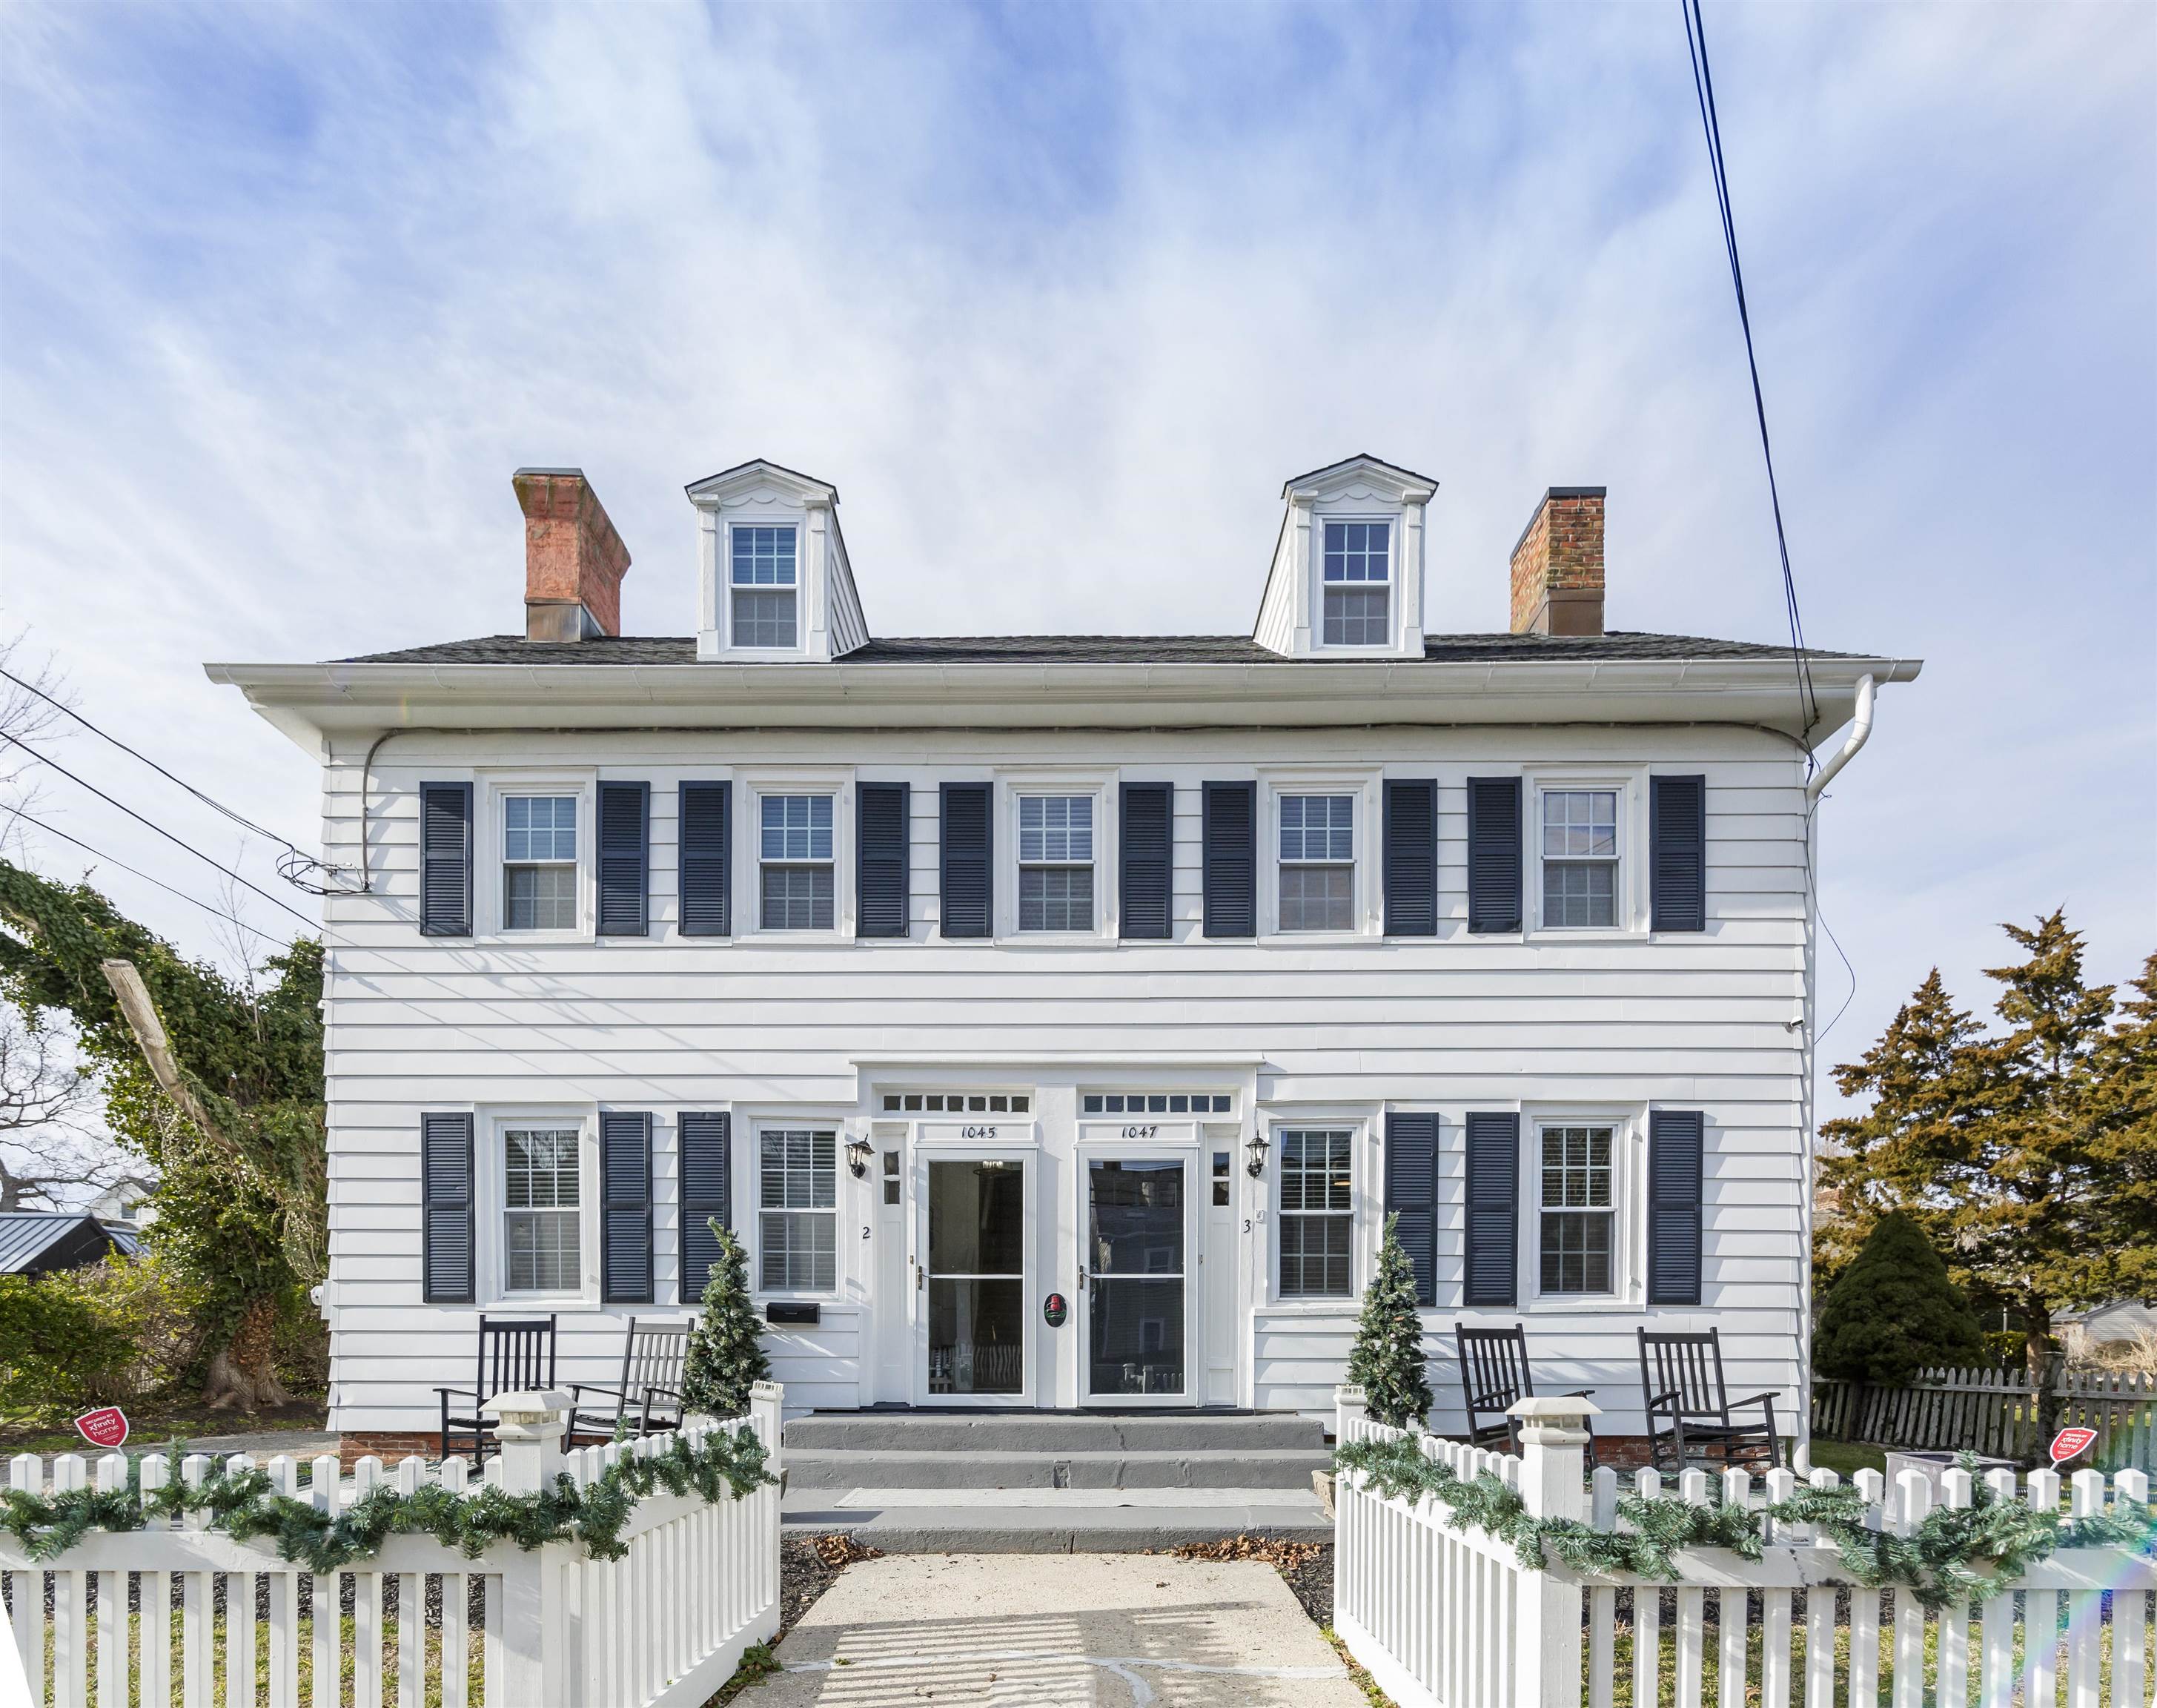 1045-1047 Lafayette Streets - Cape May